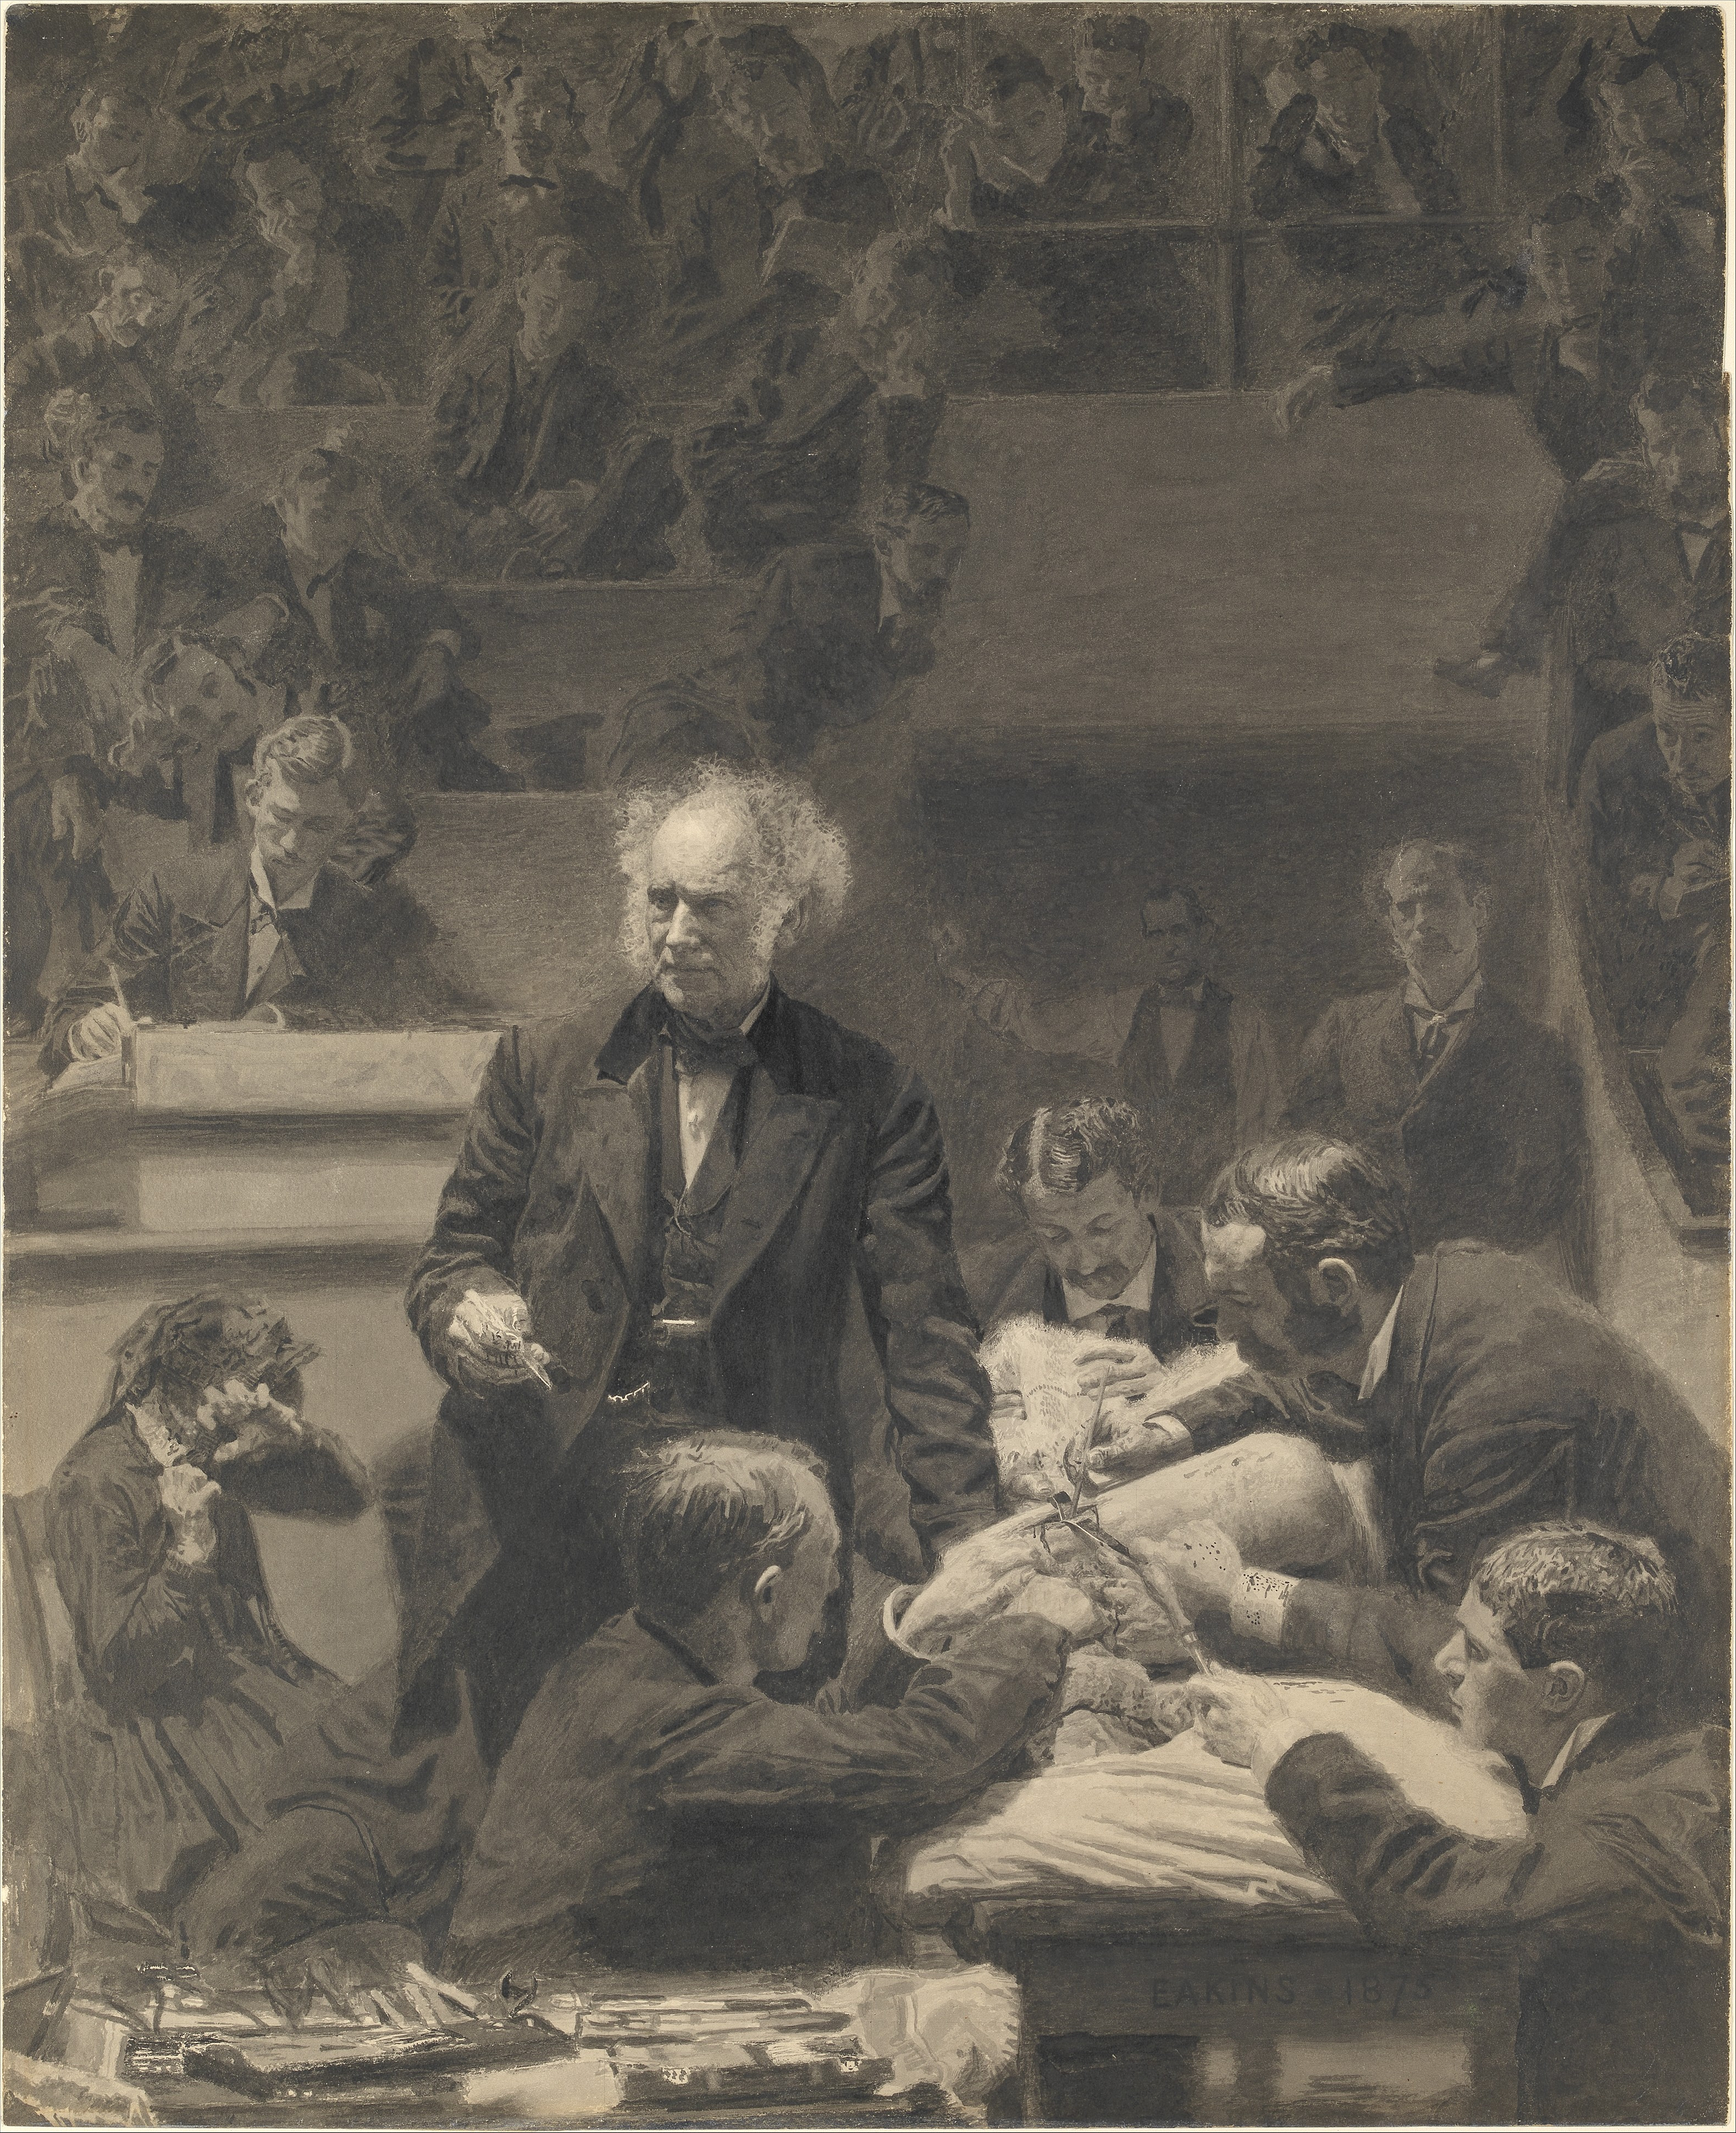 One of Thomas Eakins' most well-known paintings: The Gross Clinic, 1875–76